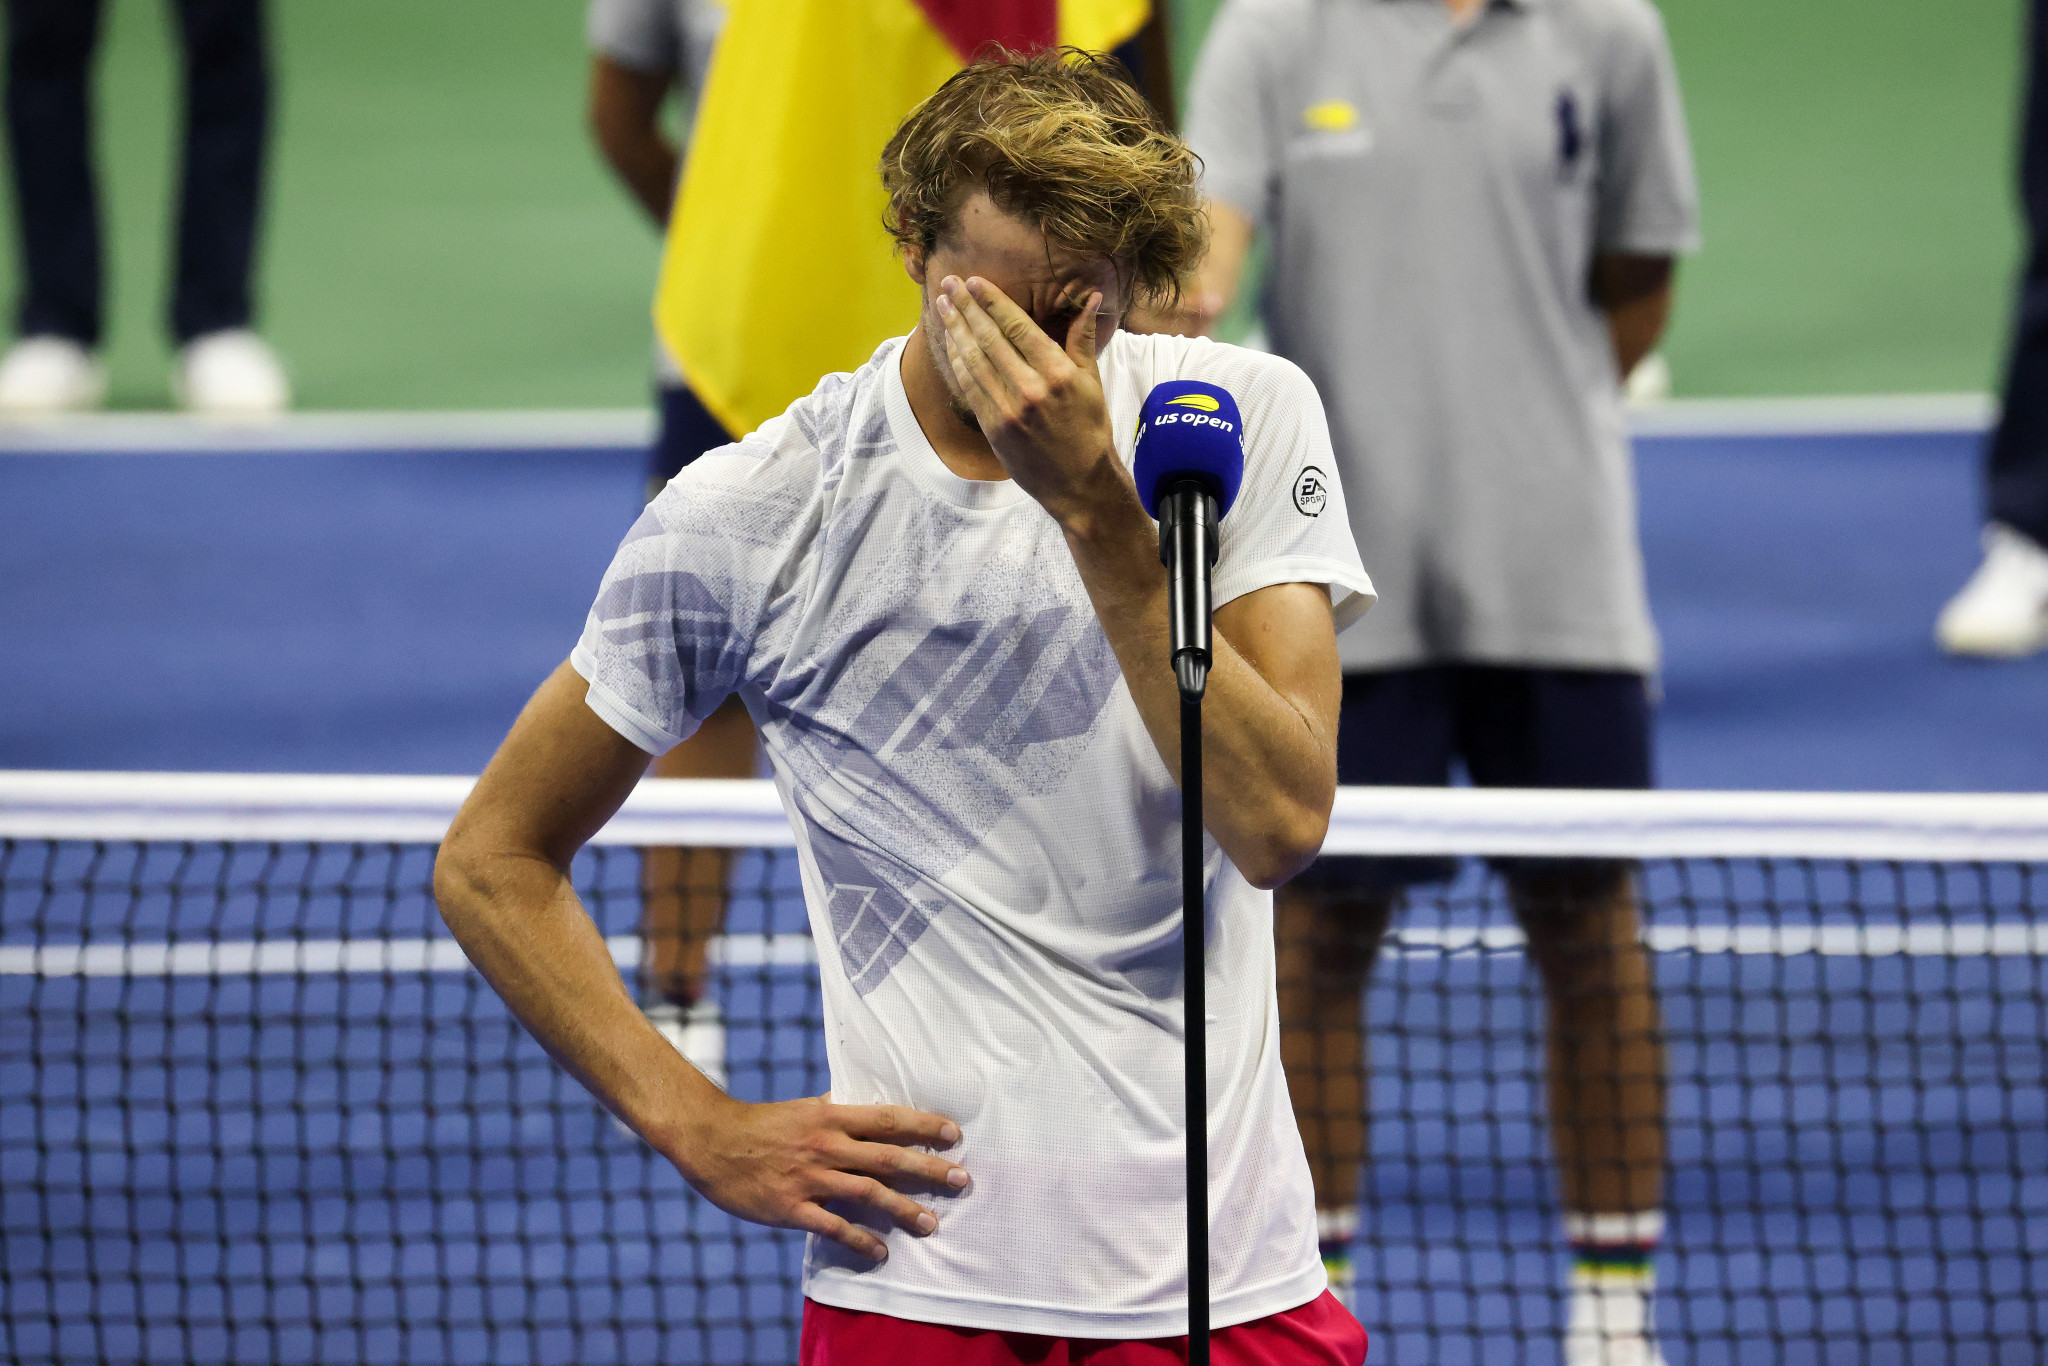 Alexander Zverev gave a tearful speech after losing the US Open men's singles final, having been two sets up ©Getty Images